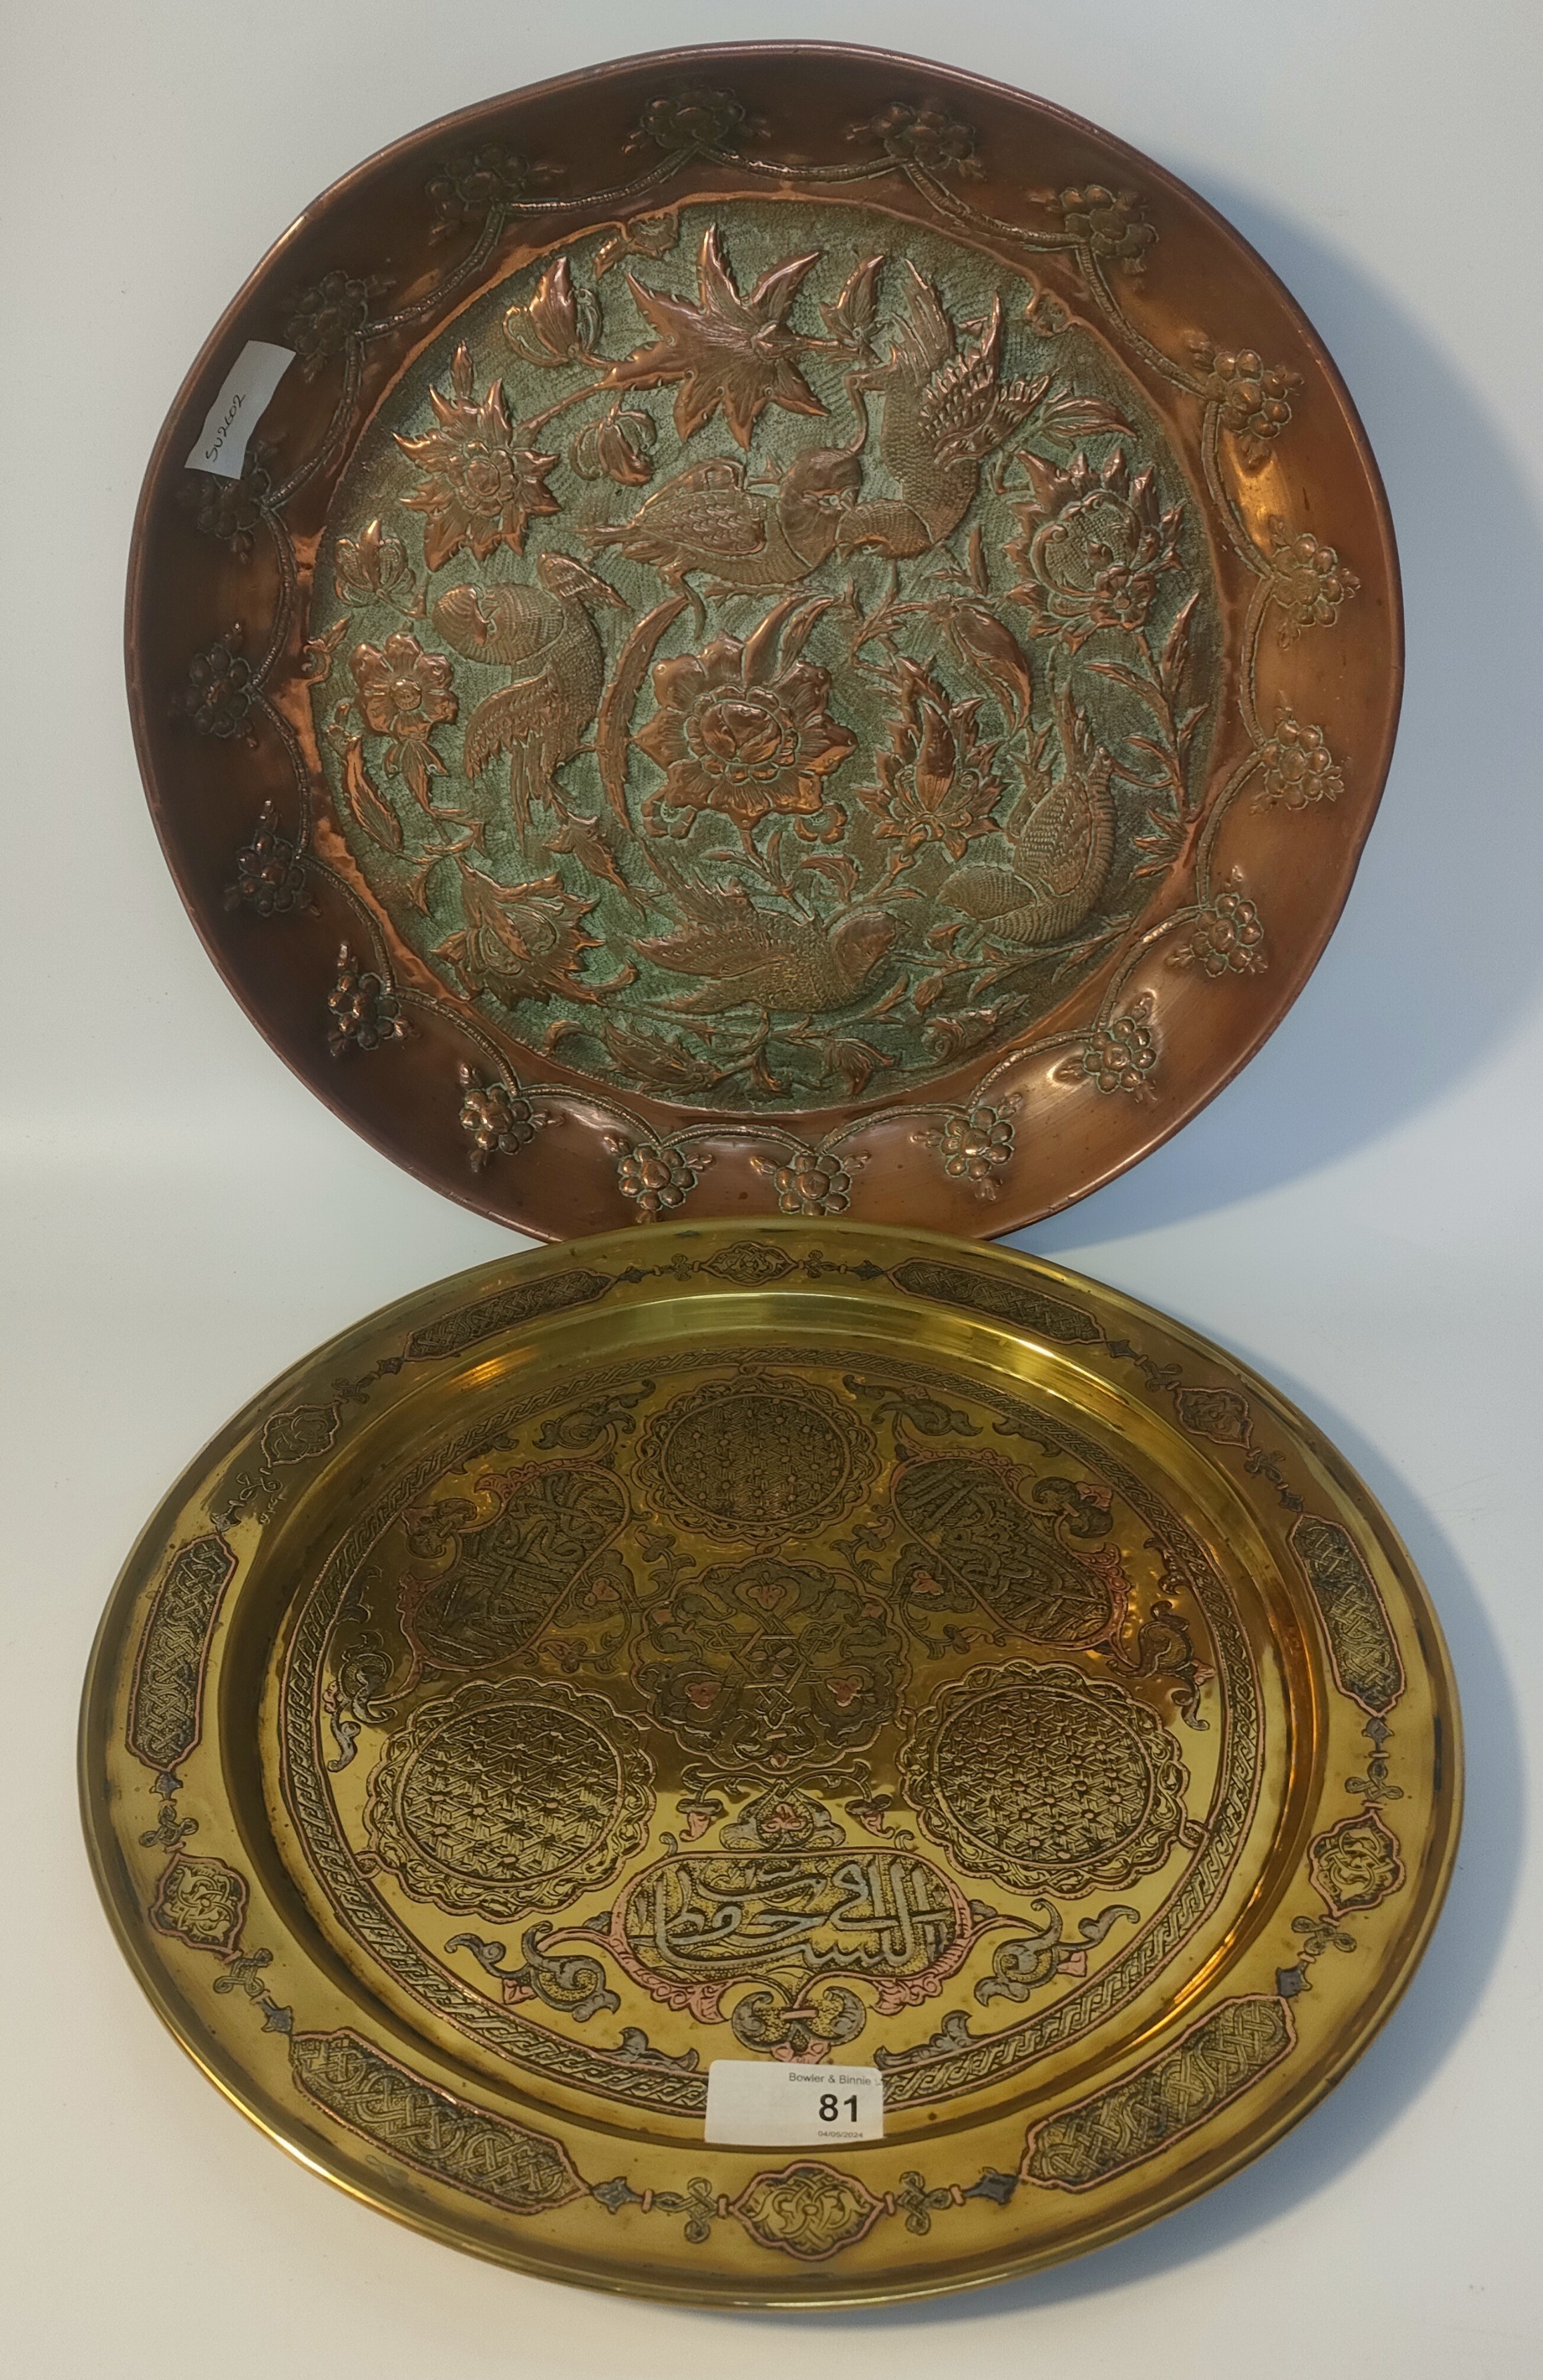 Two Antique Islamic 1900s trays; Brass & silver overlaid Islamic tray along with raised bird scene